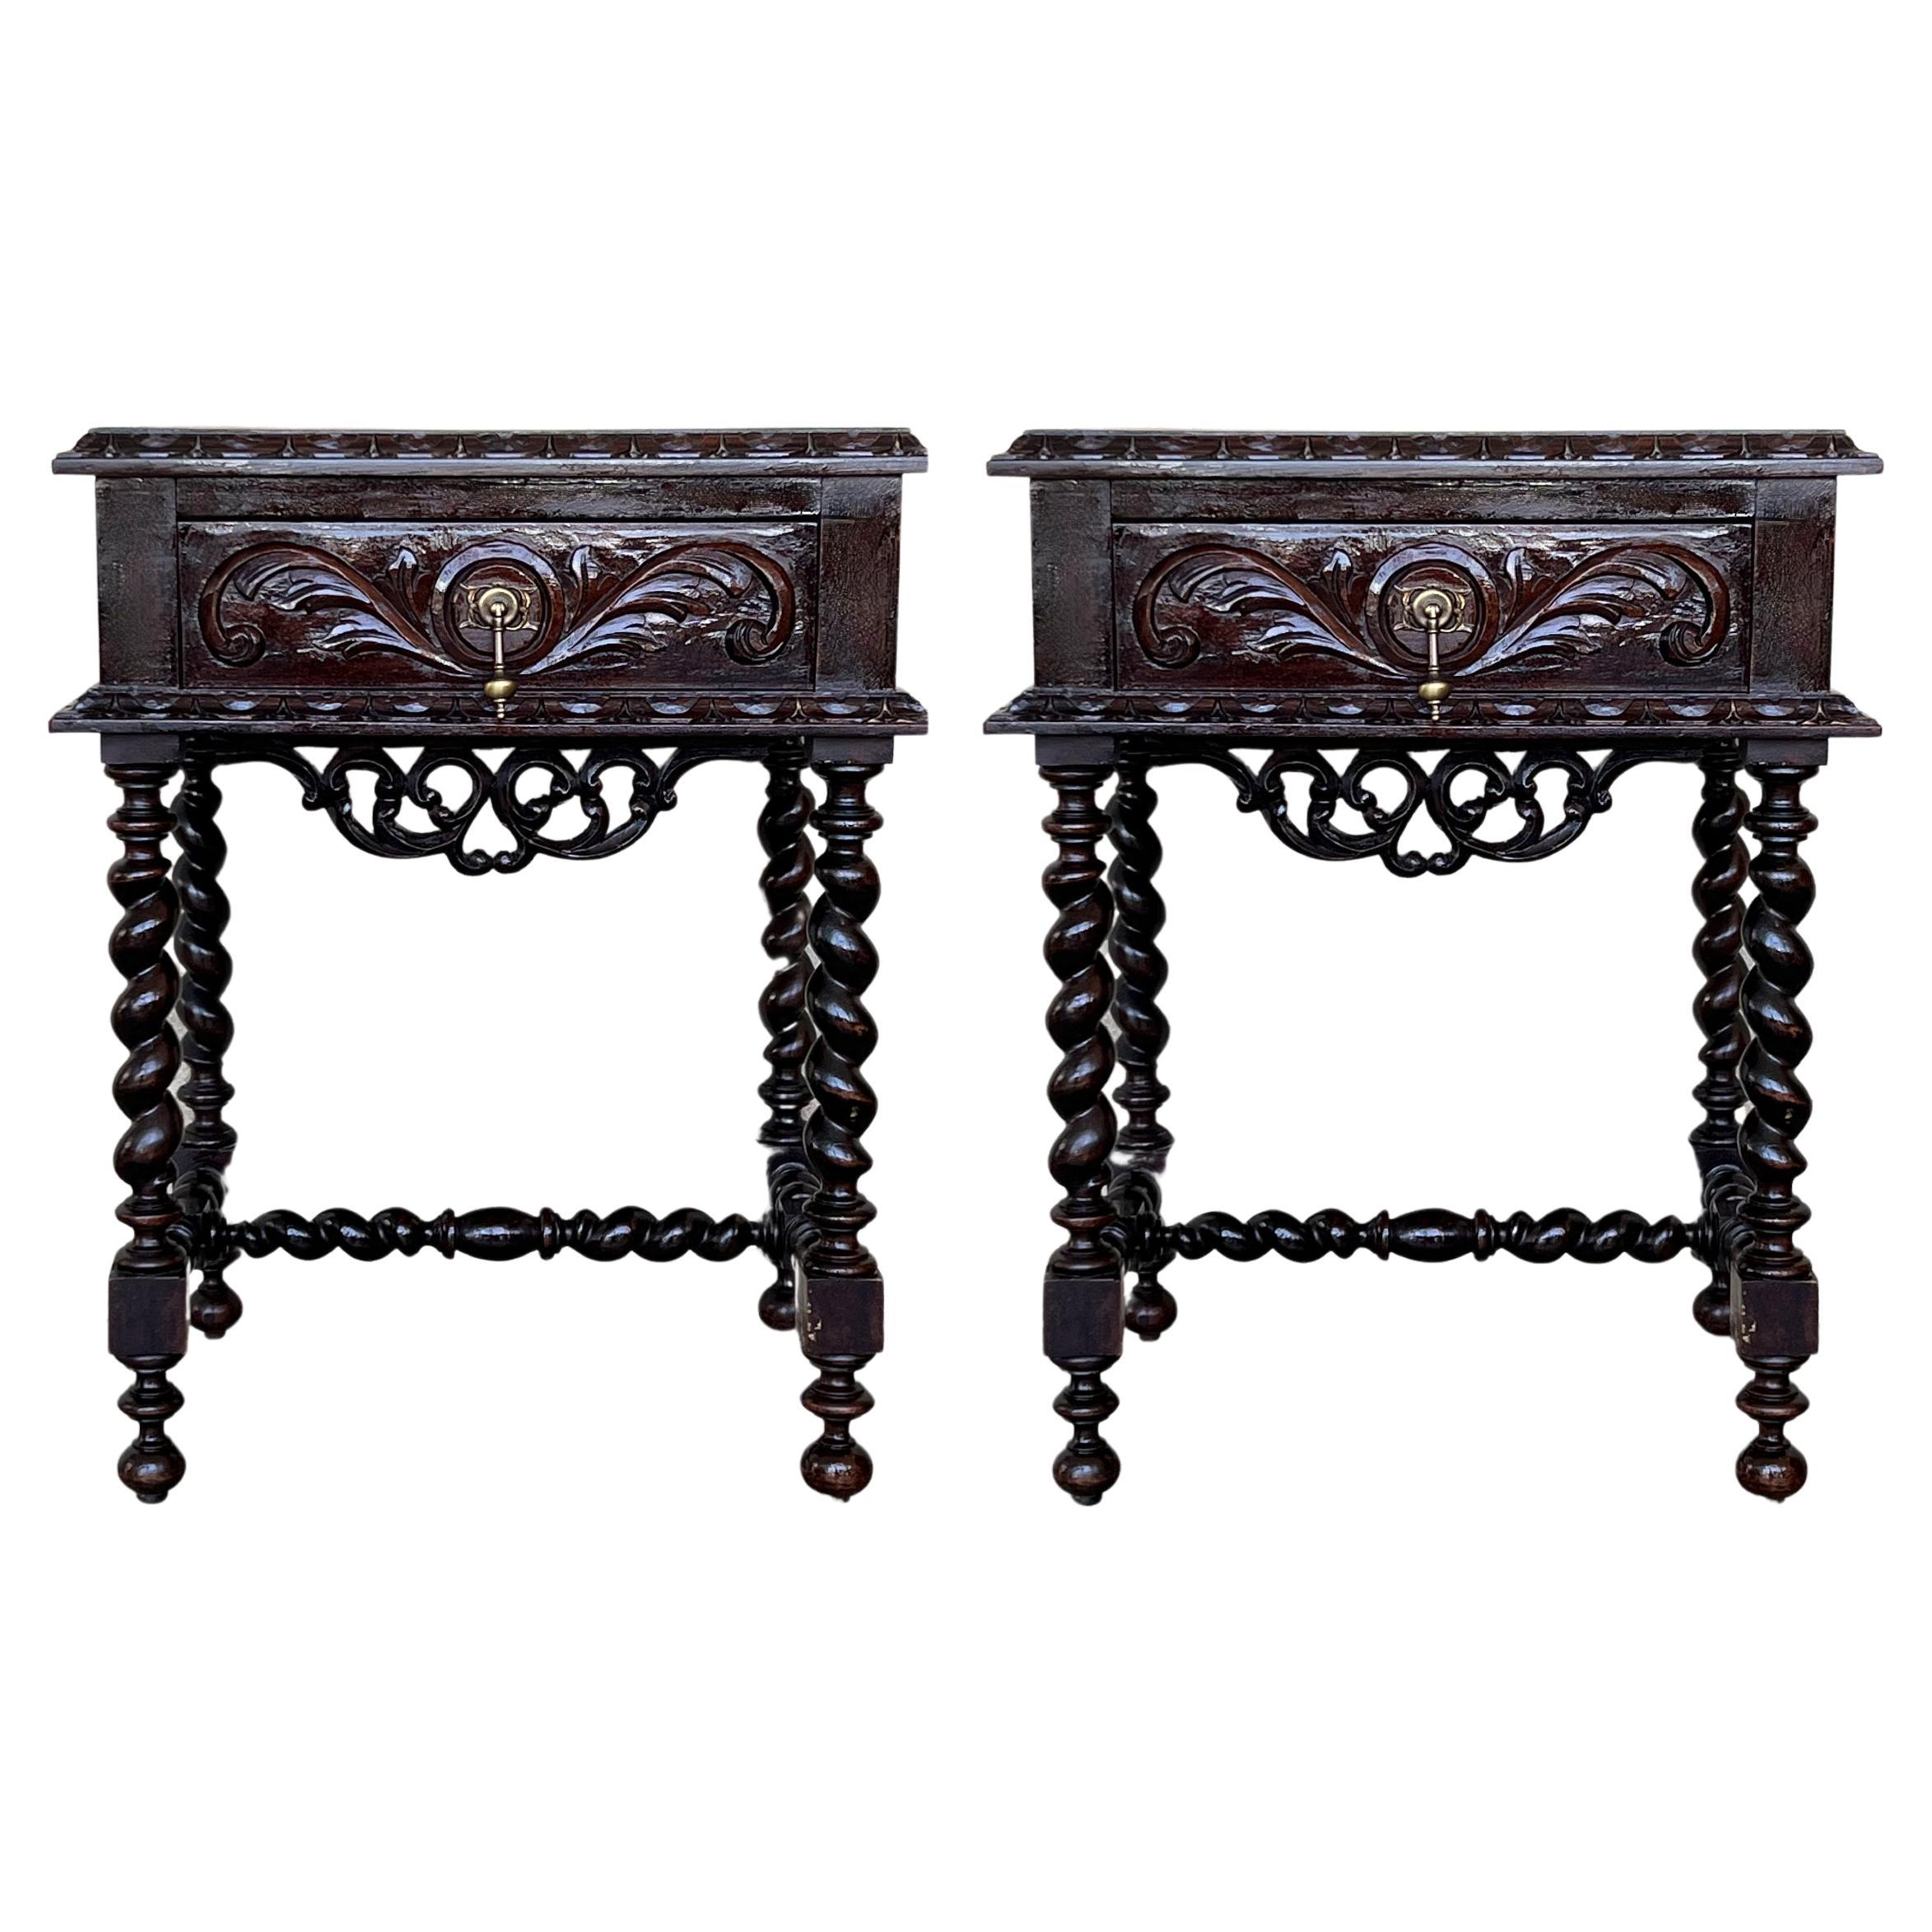 Pair of Carved Spanish Nightstands with Solomonic Columns and Drawer in Black